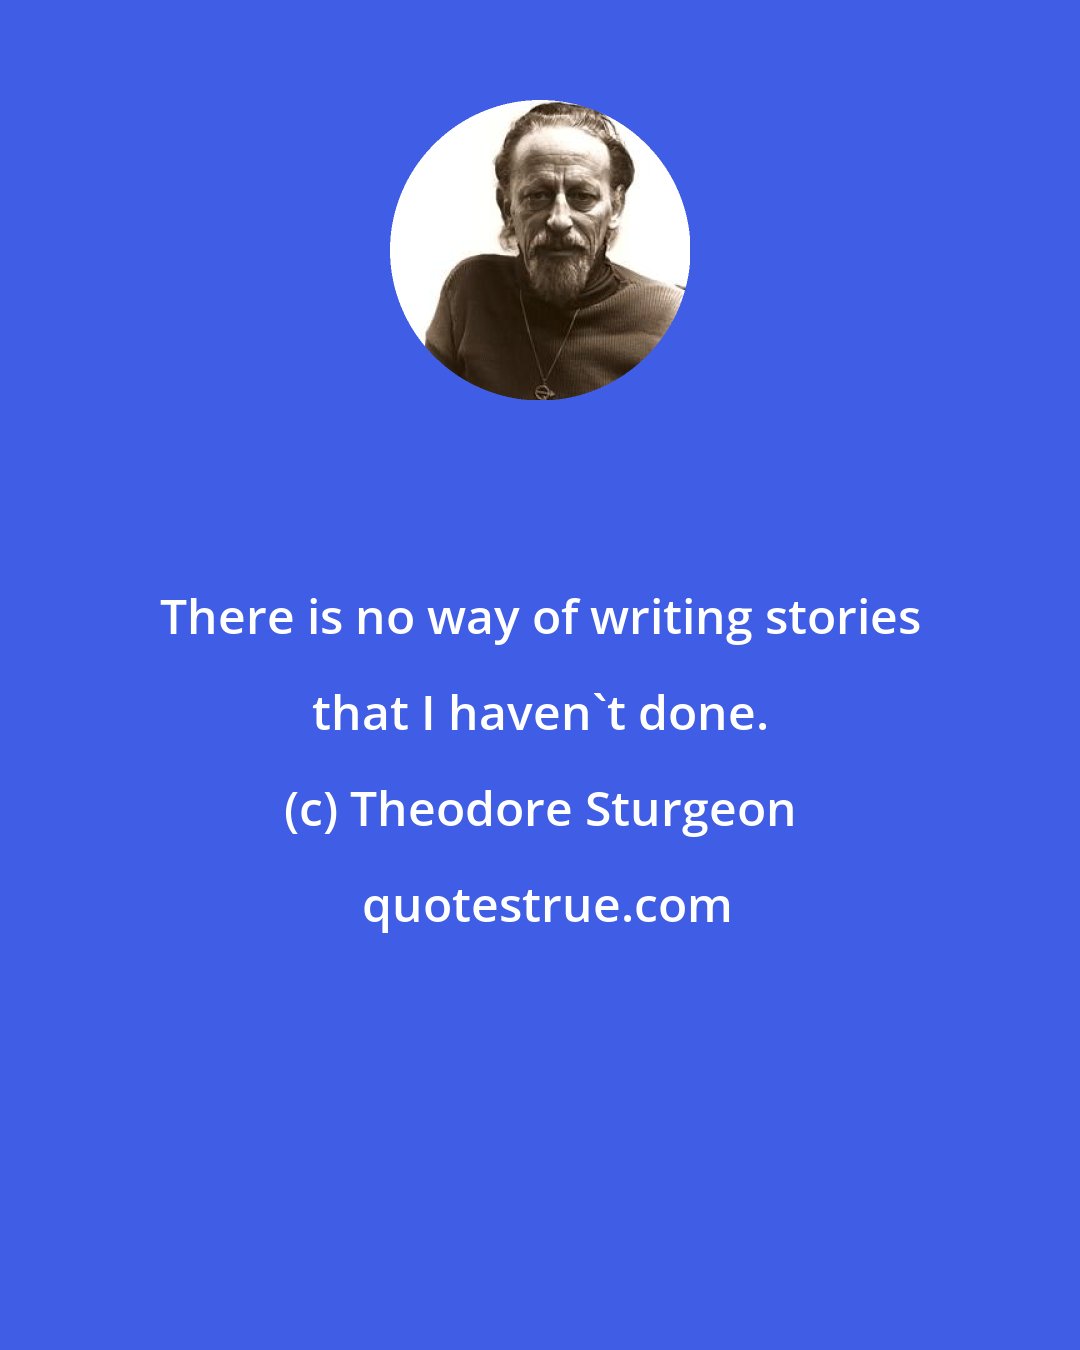 Theodore Sturgeon: There is no way of writing stories that I haven't done.